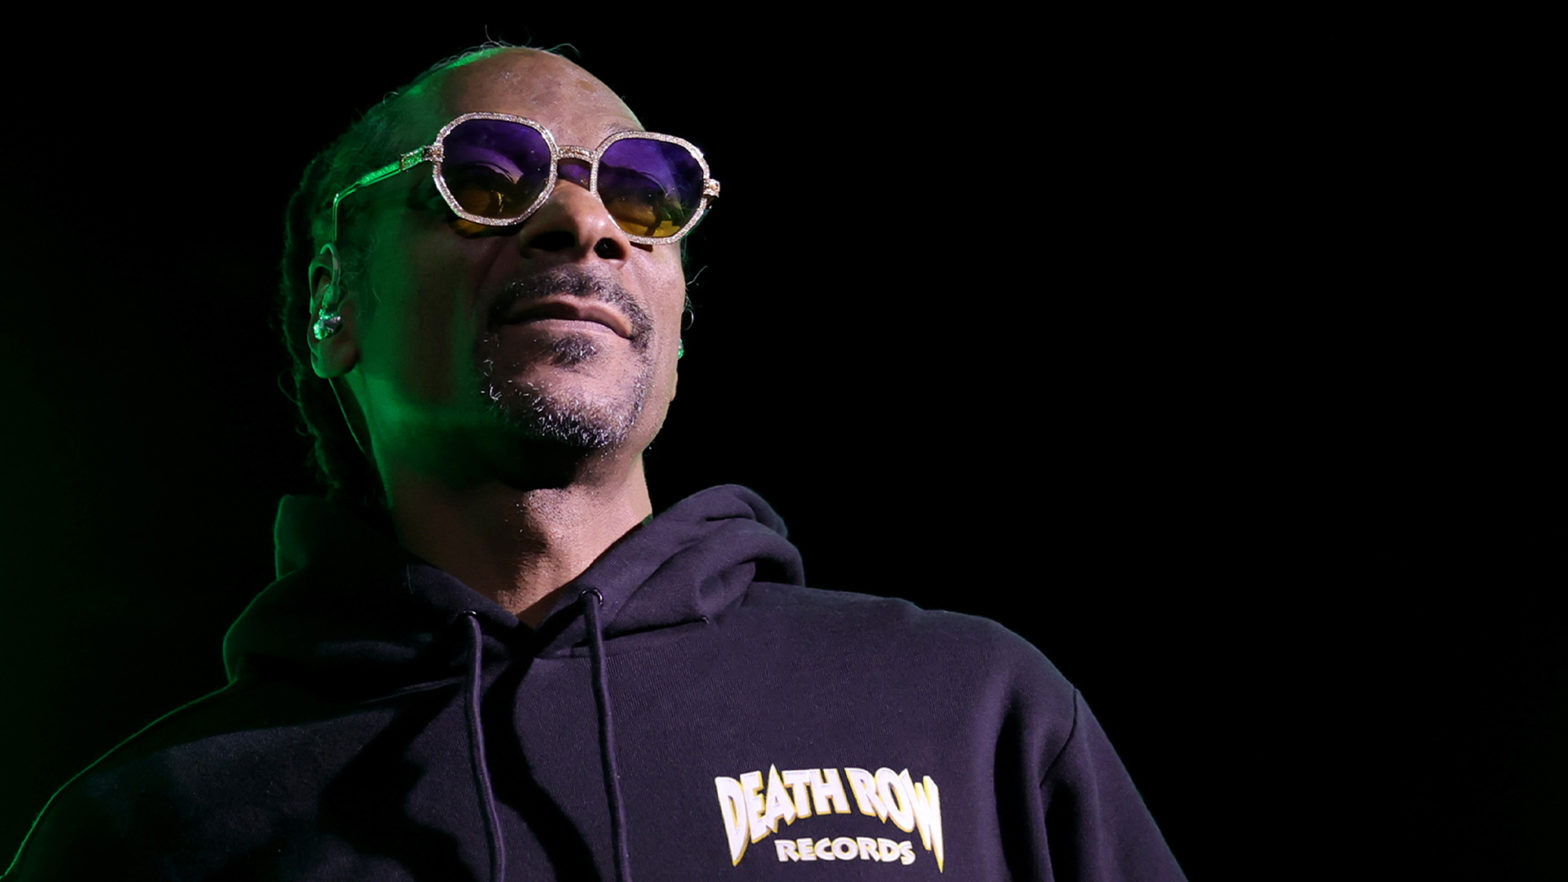 Snoop Dogg Grants Rights To Atlas Global To Use His Name, Likeness To Sell Cannabis Products Internationally – AfroTech